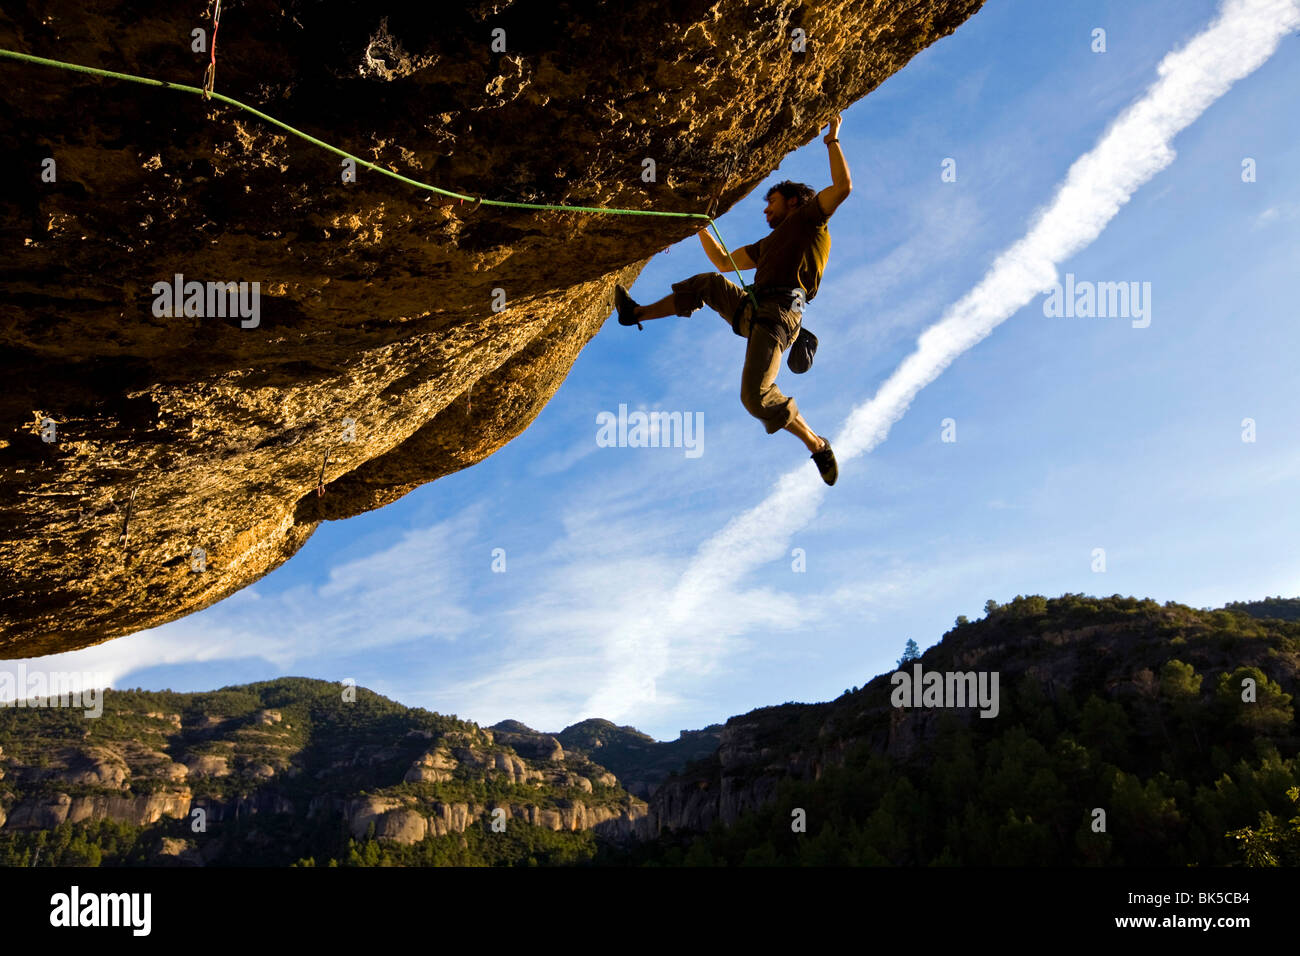 A climber on a big overhang at the cliffs of Margalef, underneath Montsant, Catalunya, Spain Stock Photo